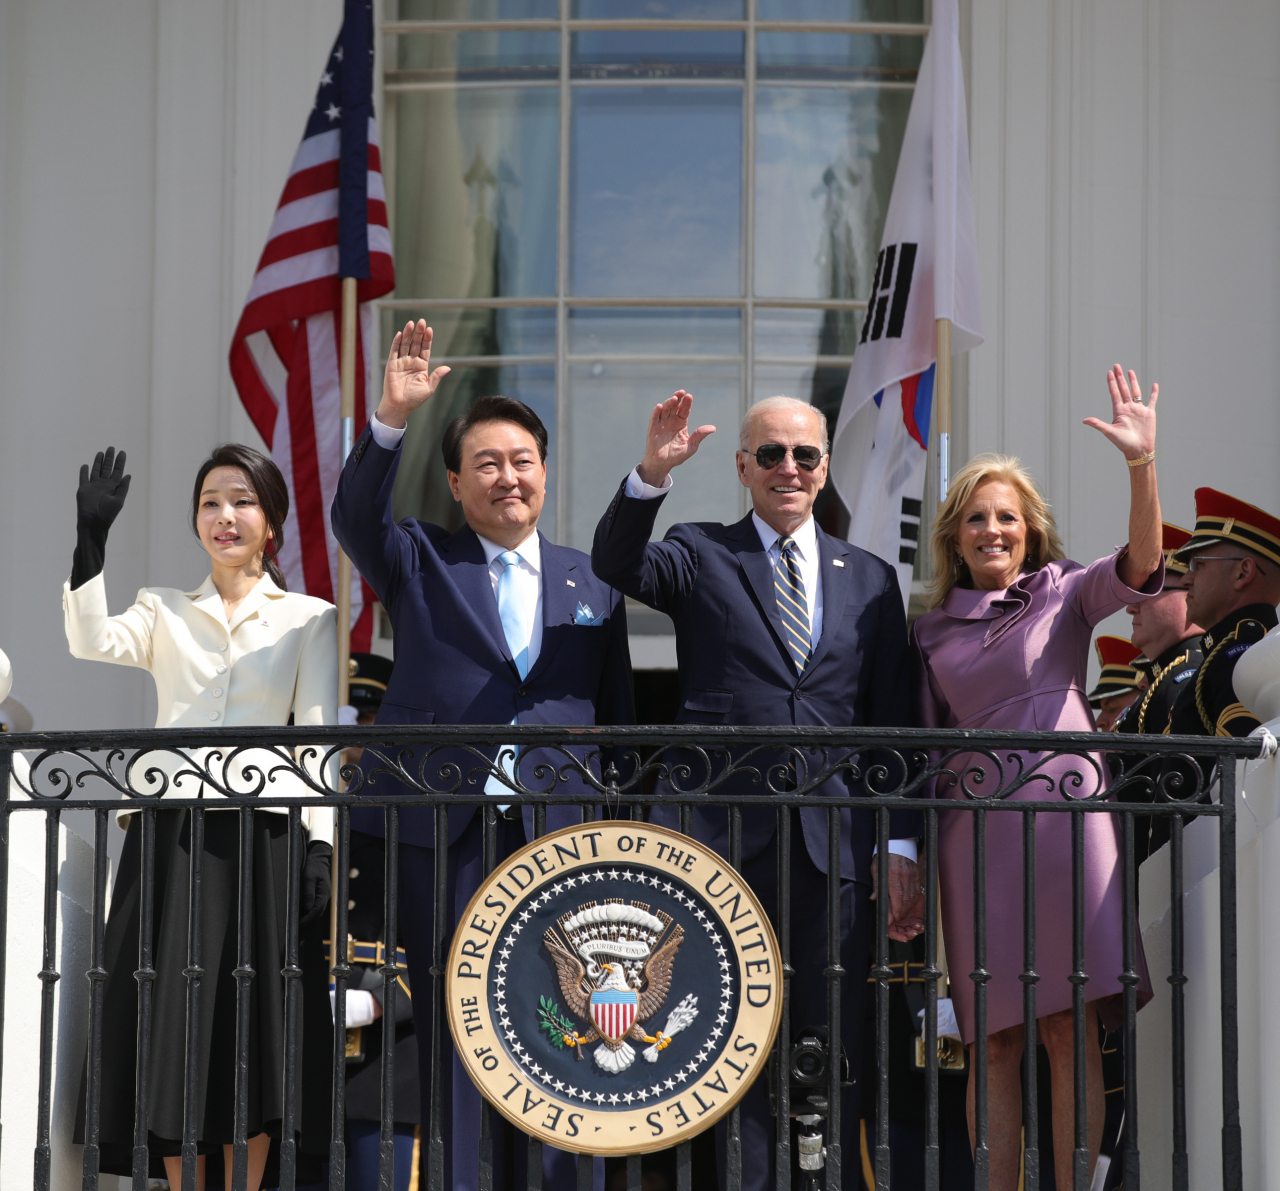 South Korean President Yoon Suk Yeol and US President Joe Biden on Wednesday wave from the balcony of the White House in Washington. (Yonhap)